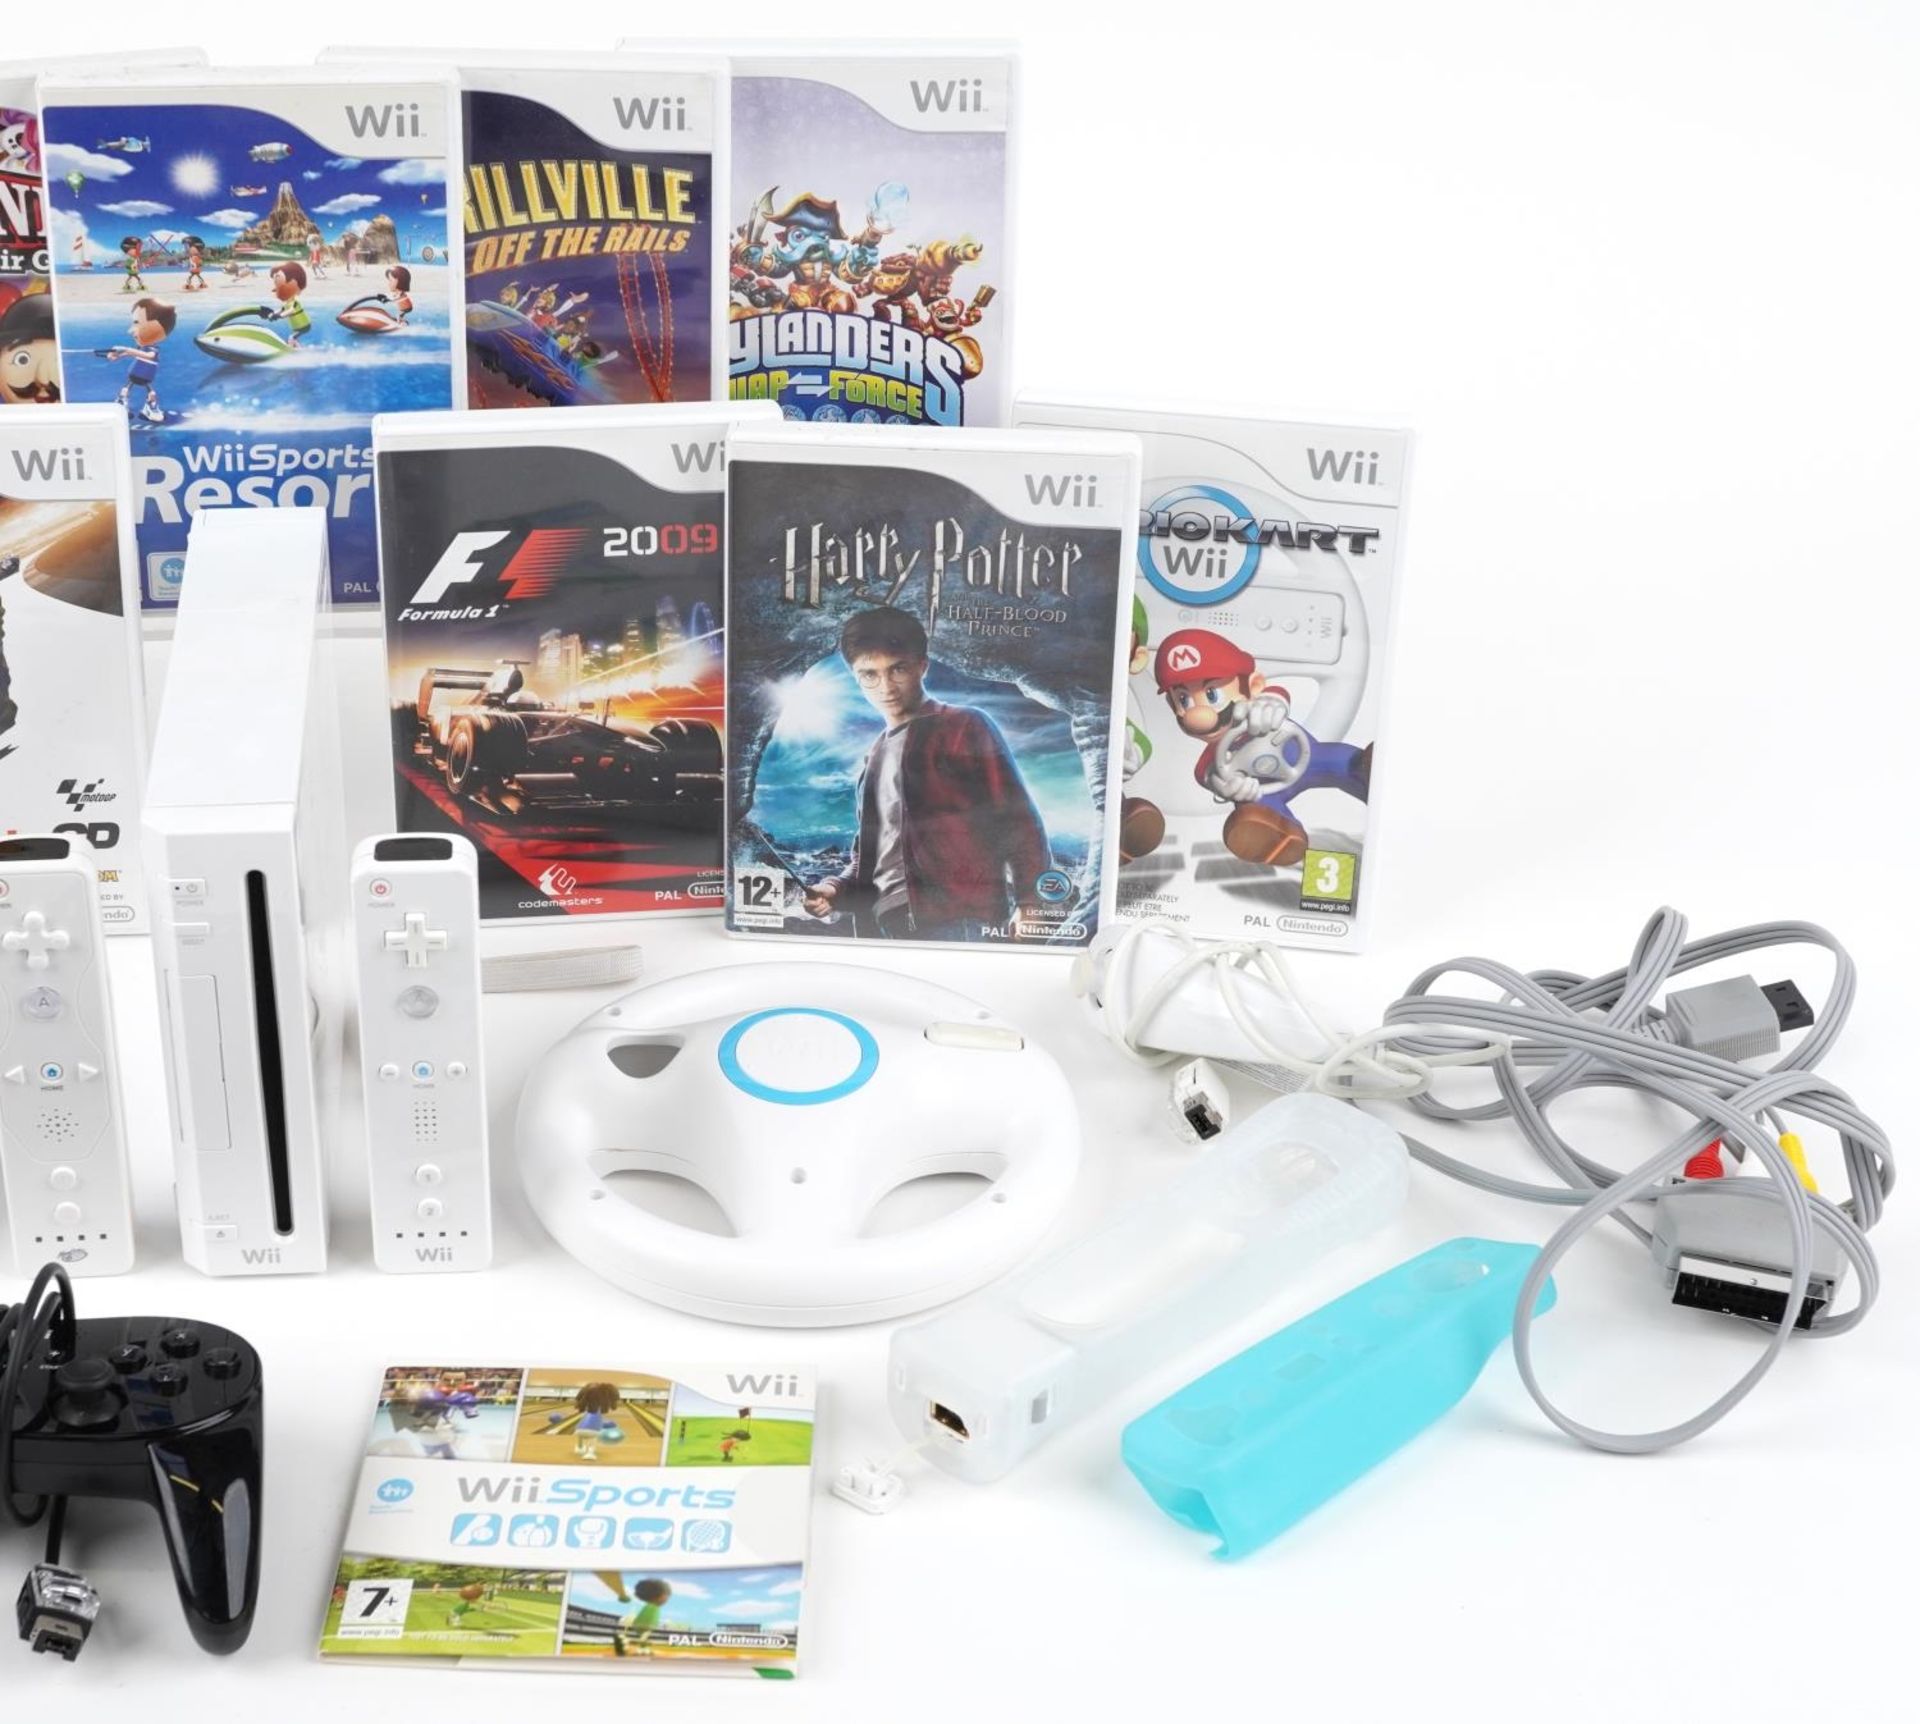 Nintendo Wii games console with controllers, accessories and a collection of games - Bild 3 aus 3